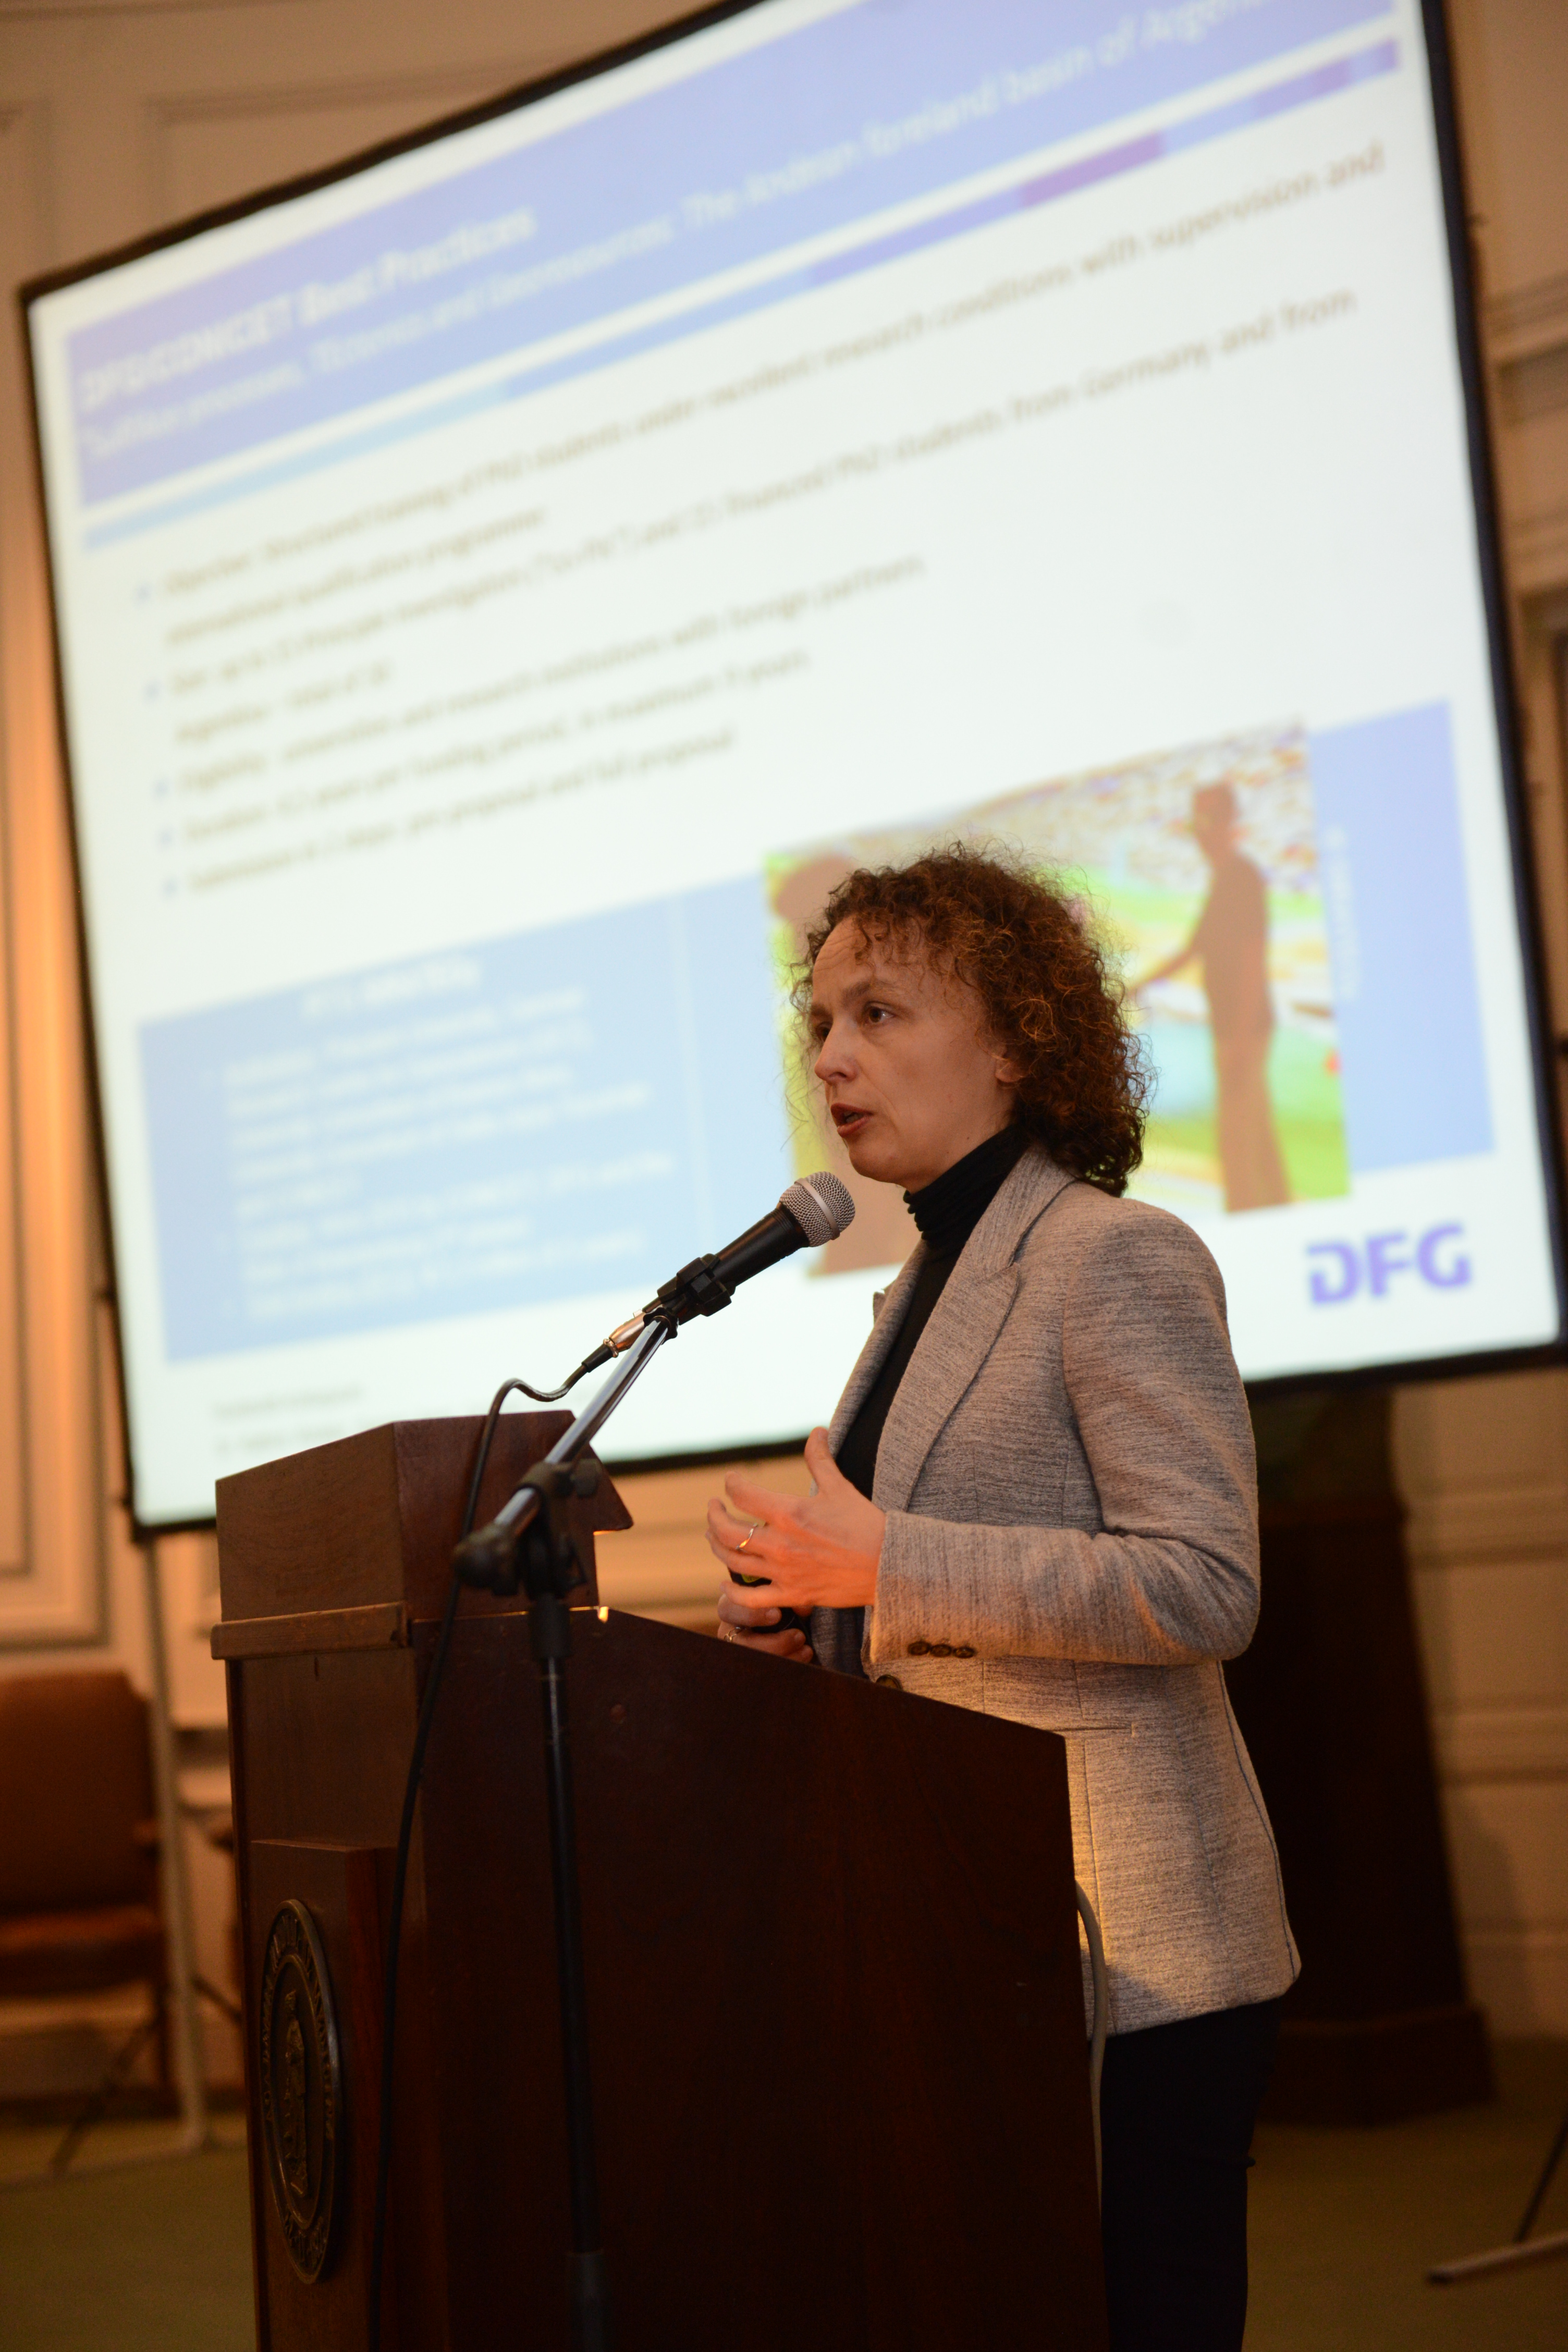 Kathrin Winkler during her presentation about DFG’s cooperation with Argentina